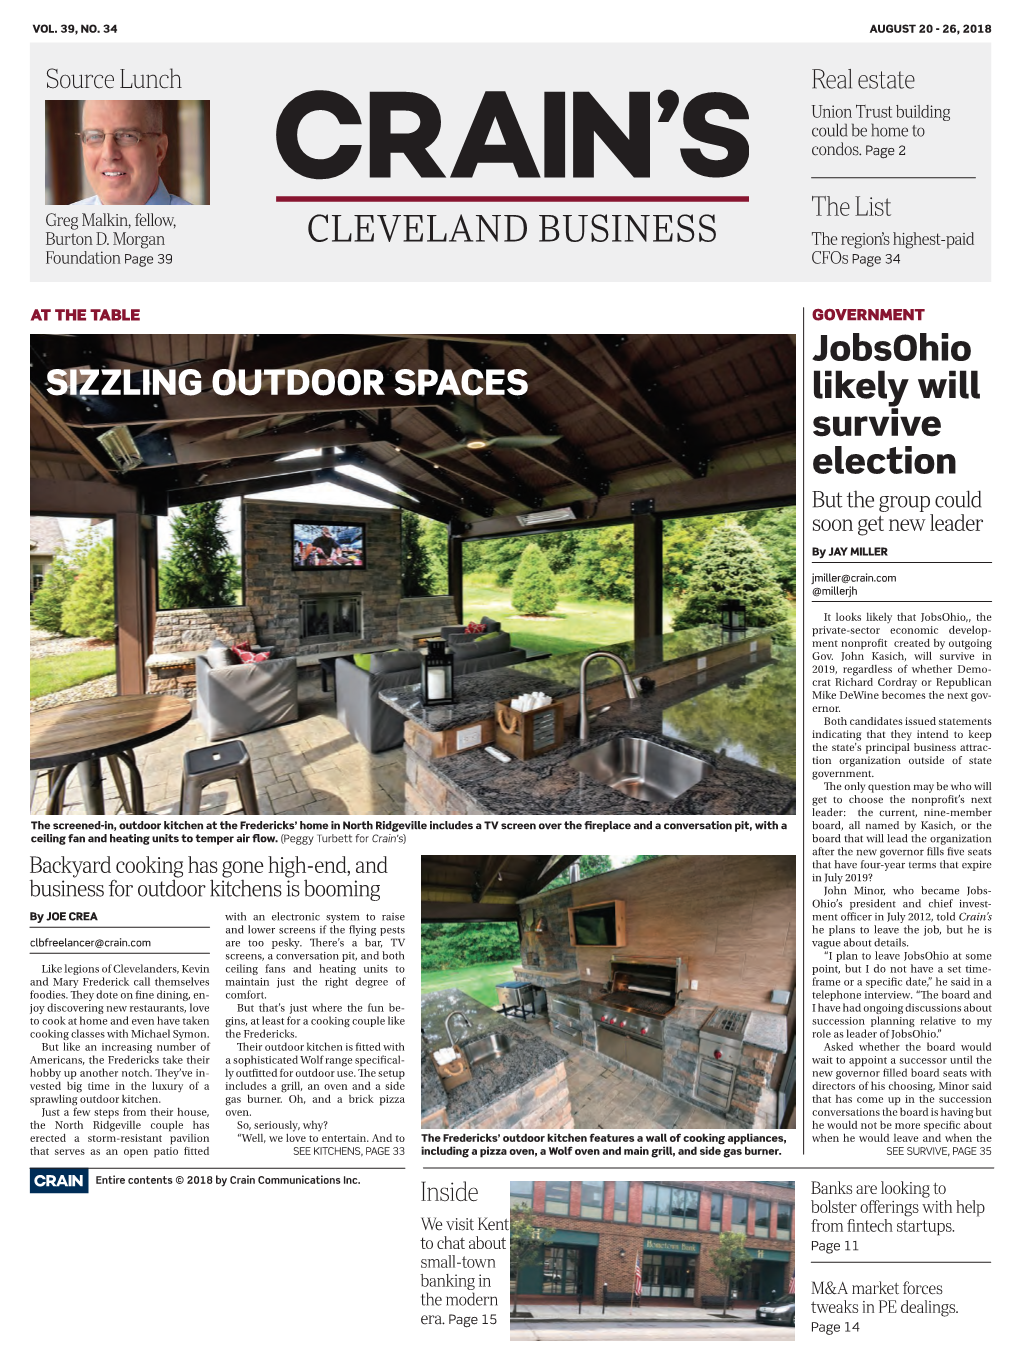 CLEVELAND BUSINESS the Region’S Highest-Paid Foundation Page 39 Cfos Page 34